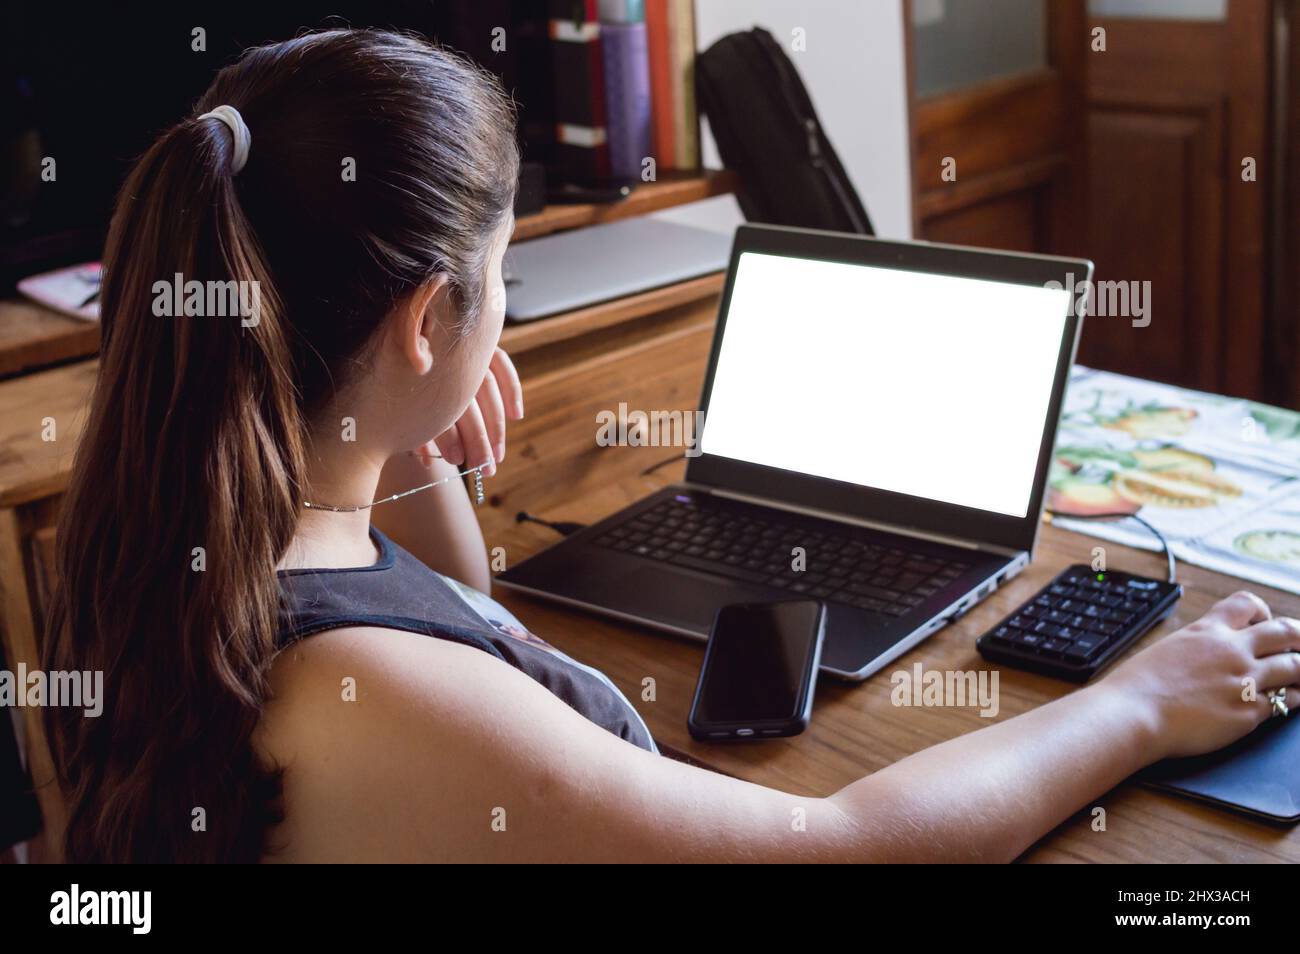 back view of young caucasian woman at home looking at her laptop screen with one hand on the mouse and a cell phone on the keyboard. Stock Photo